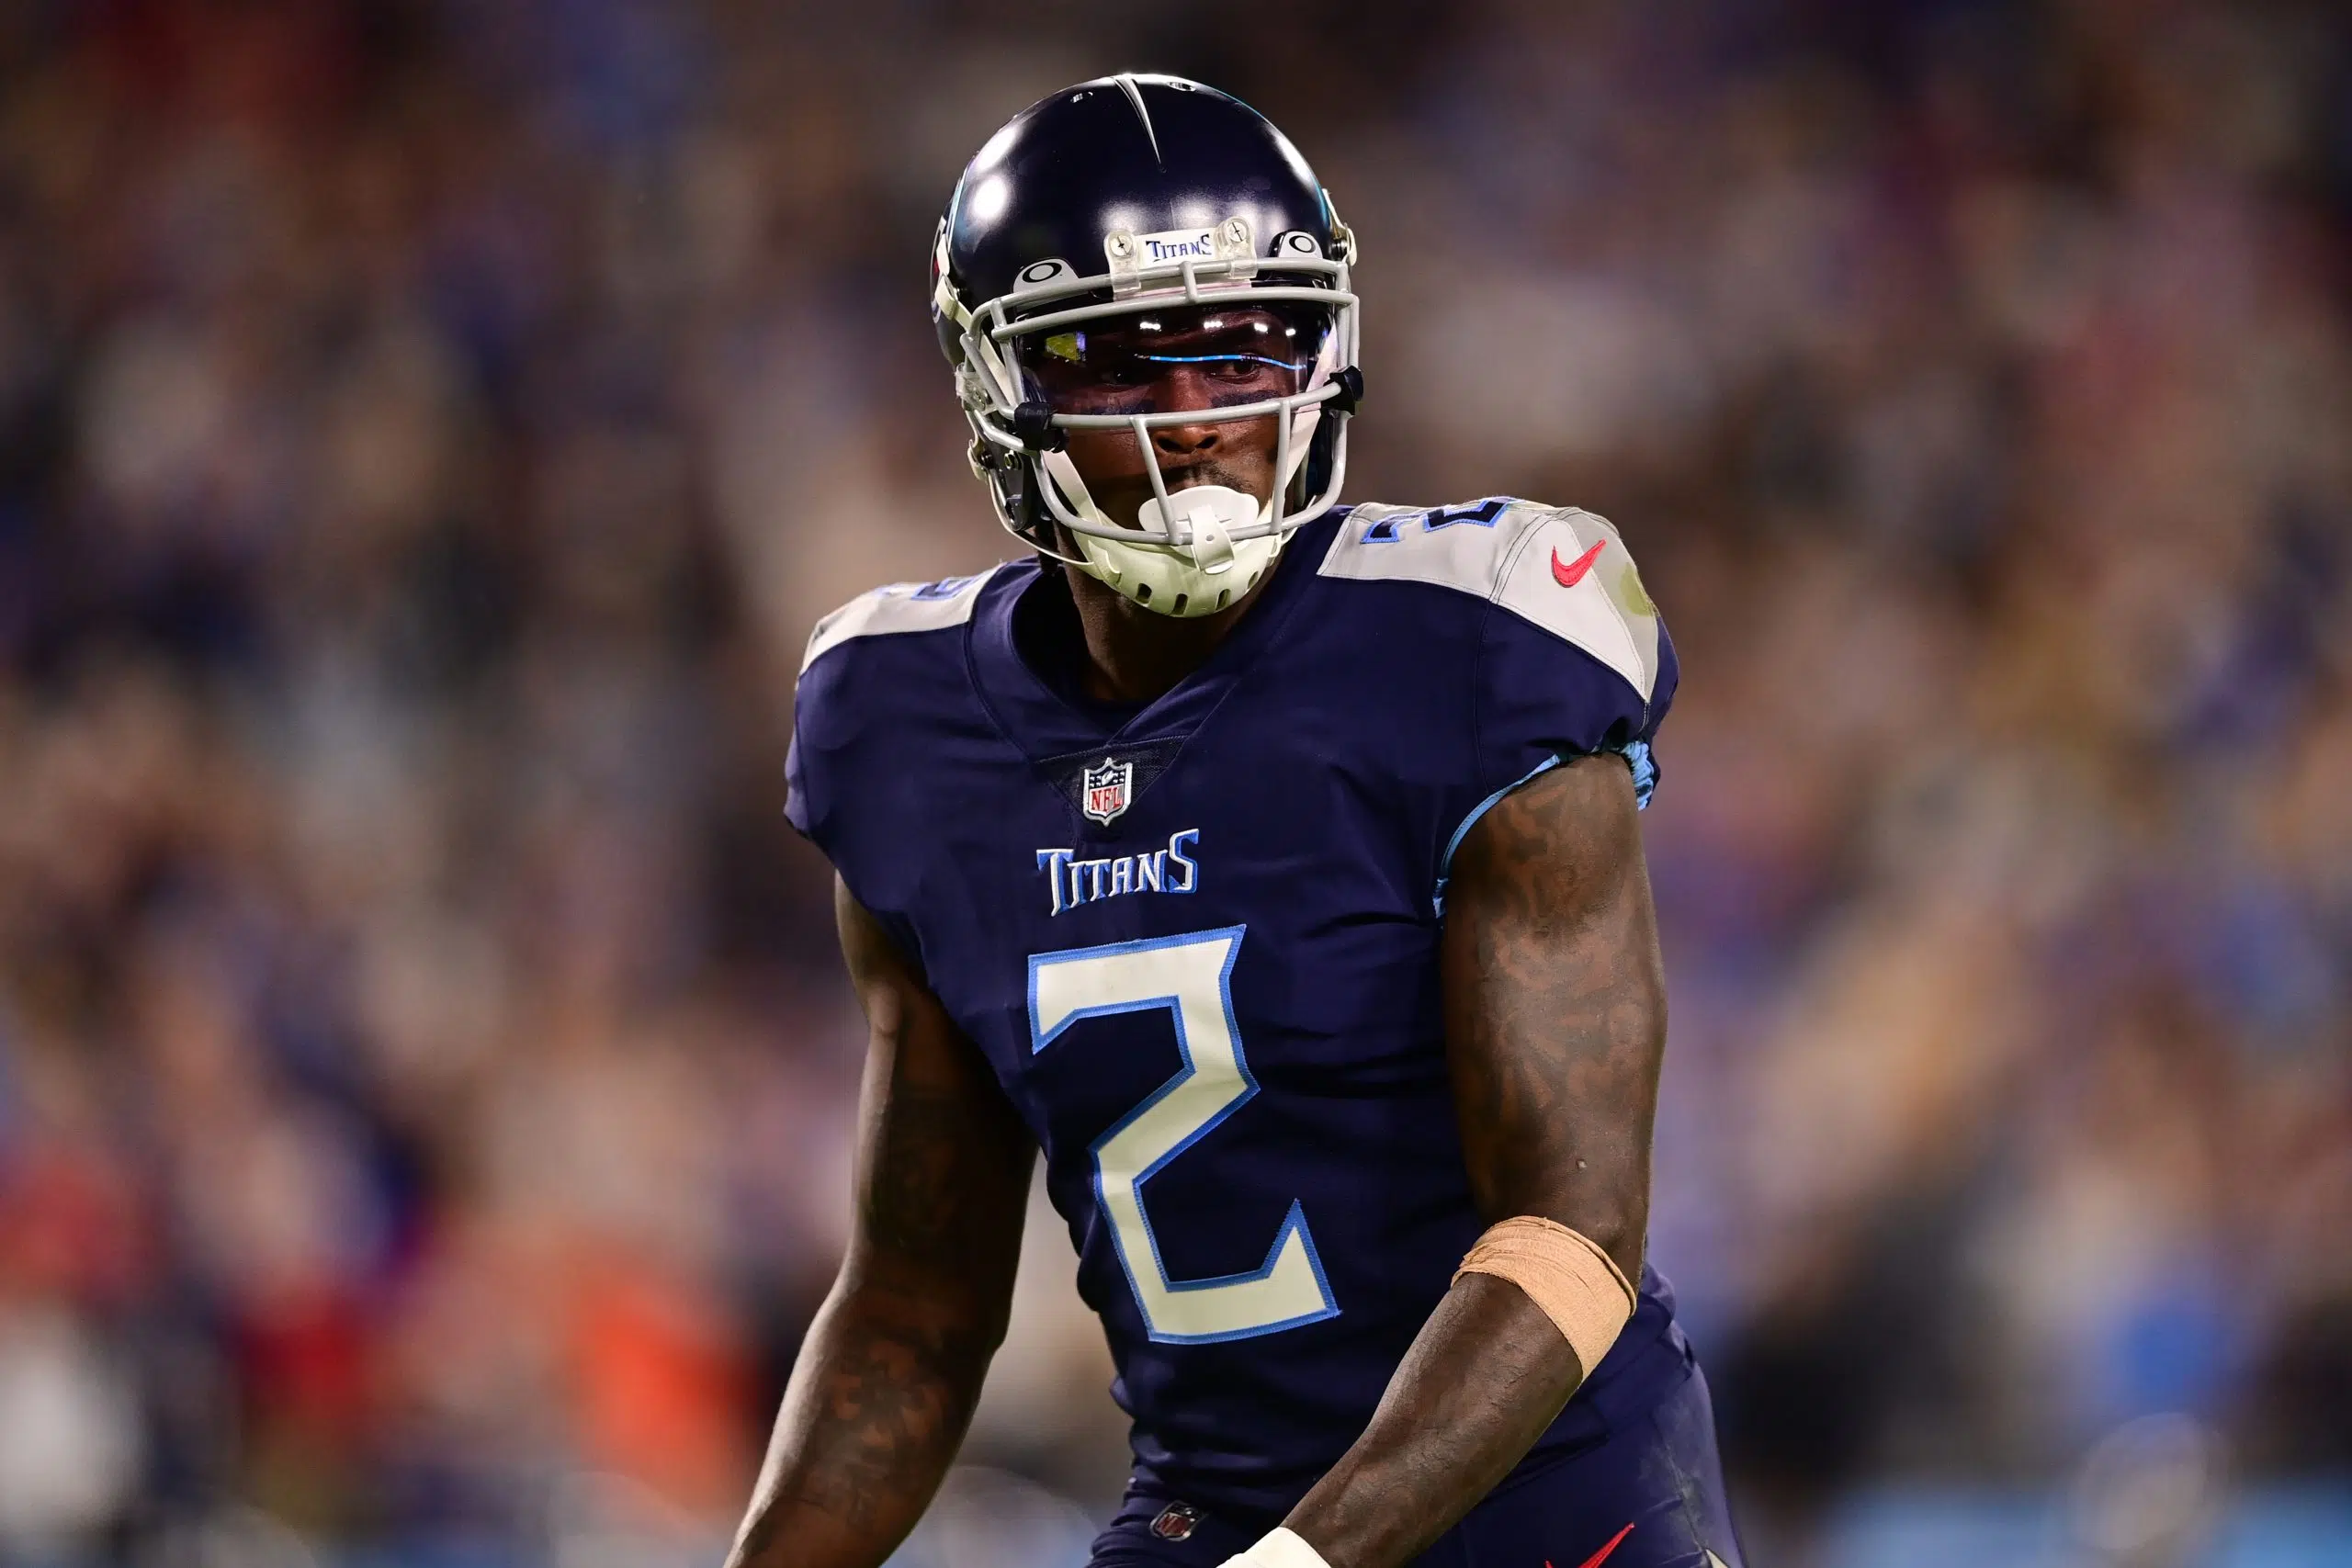 Tennessee Titans' roster ranked among NFL's worst by ESPN